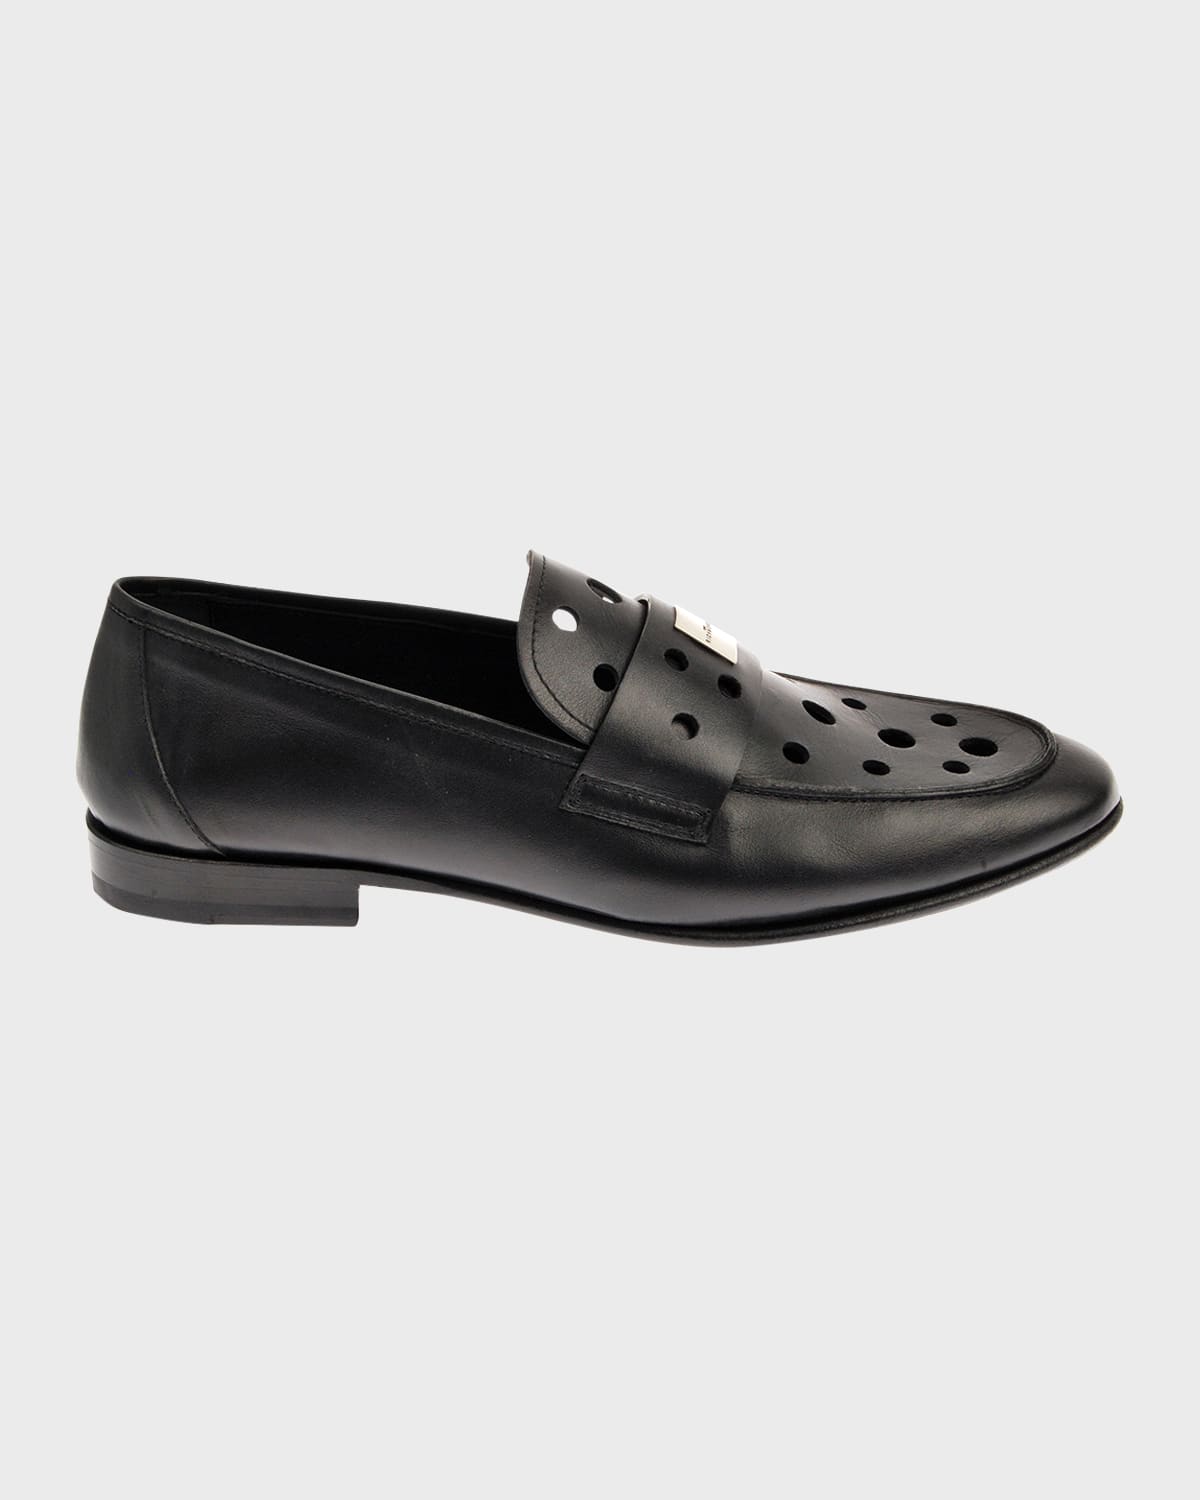 Men's Cut-Out Leather Penny Loafers